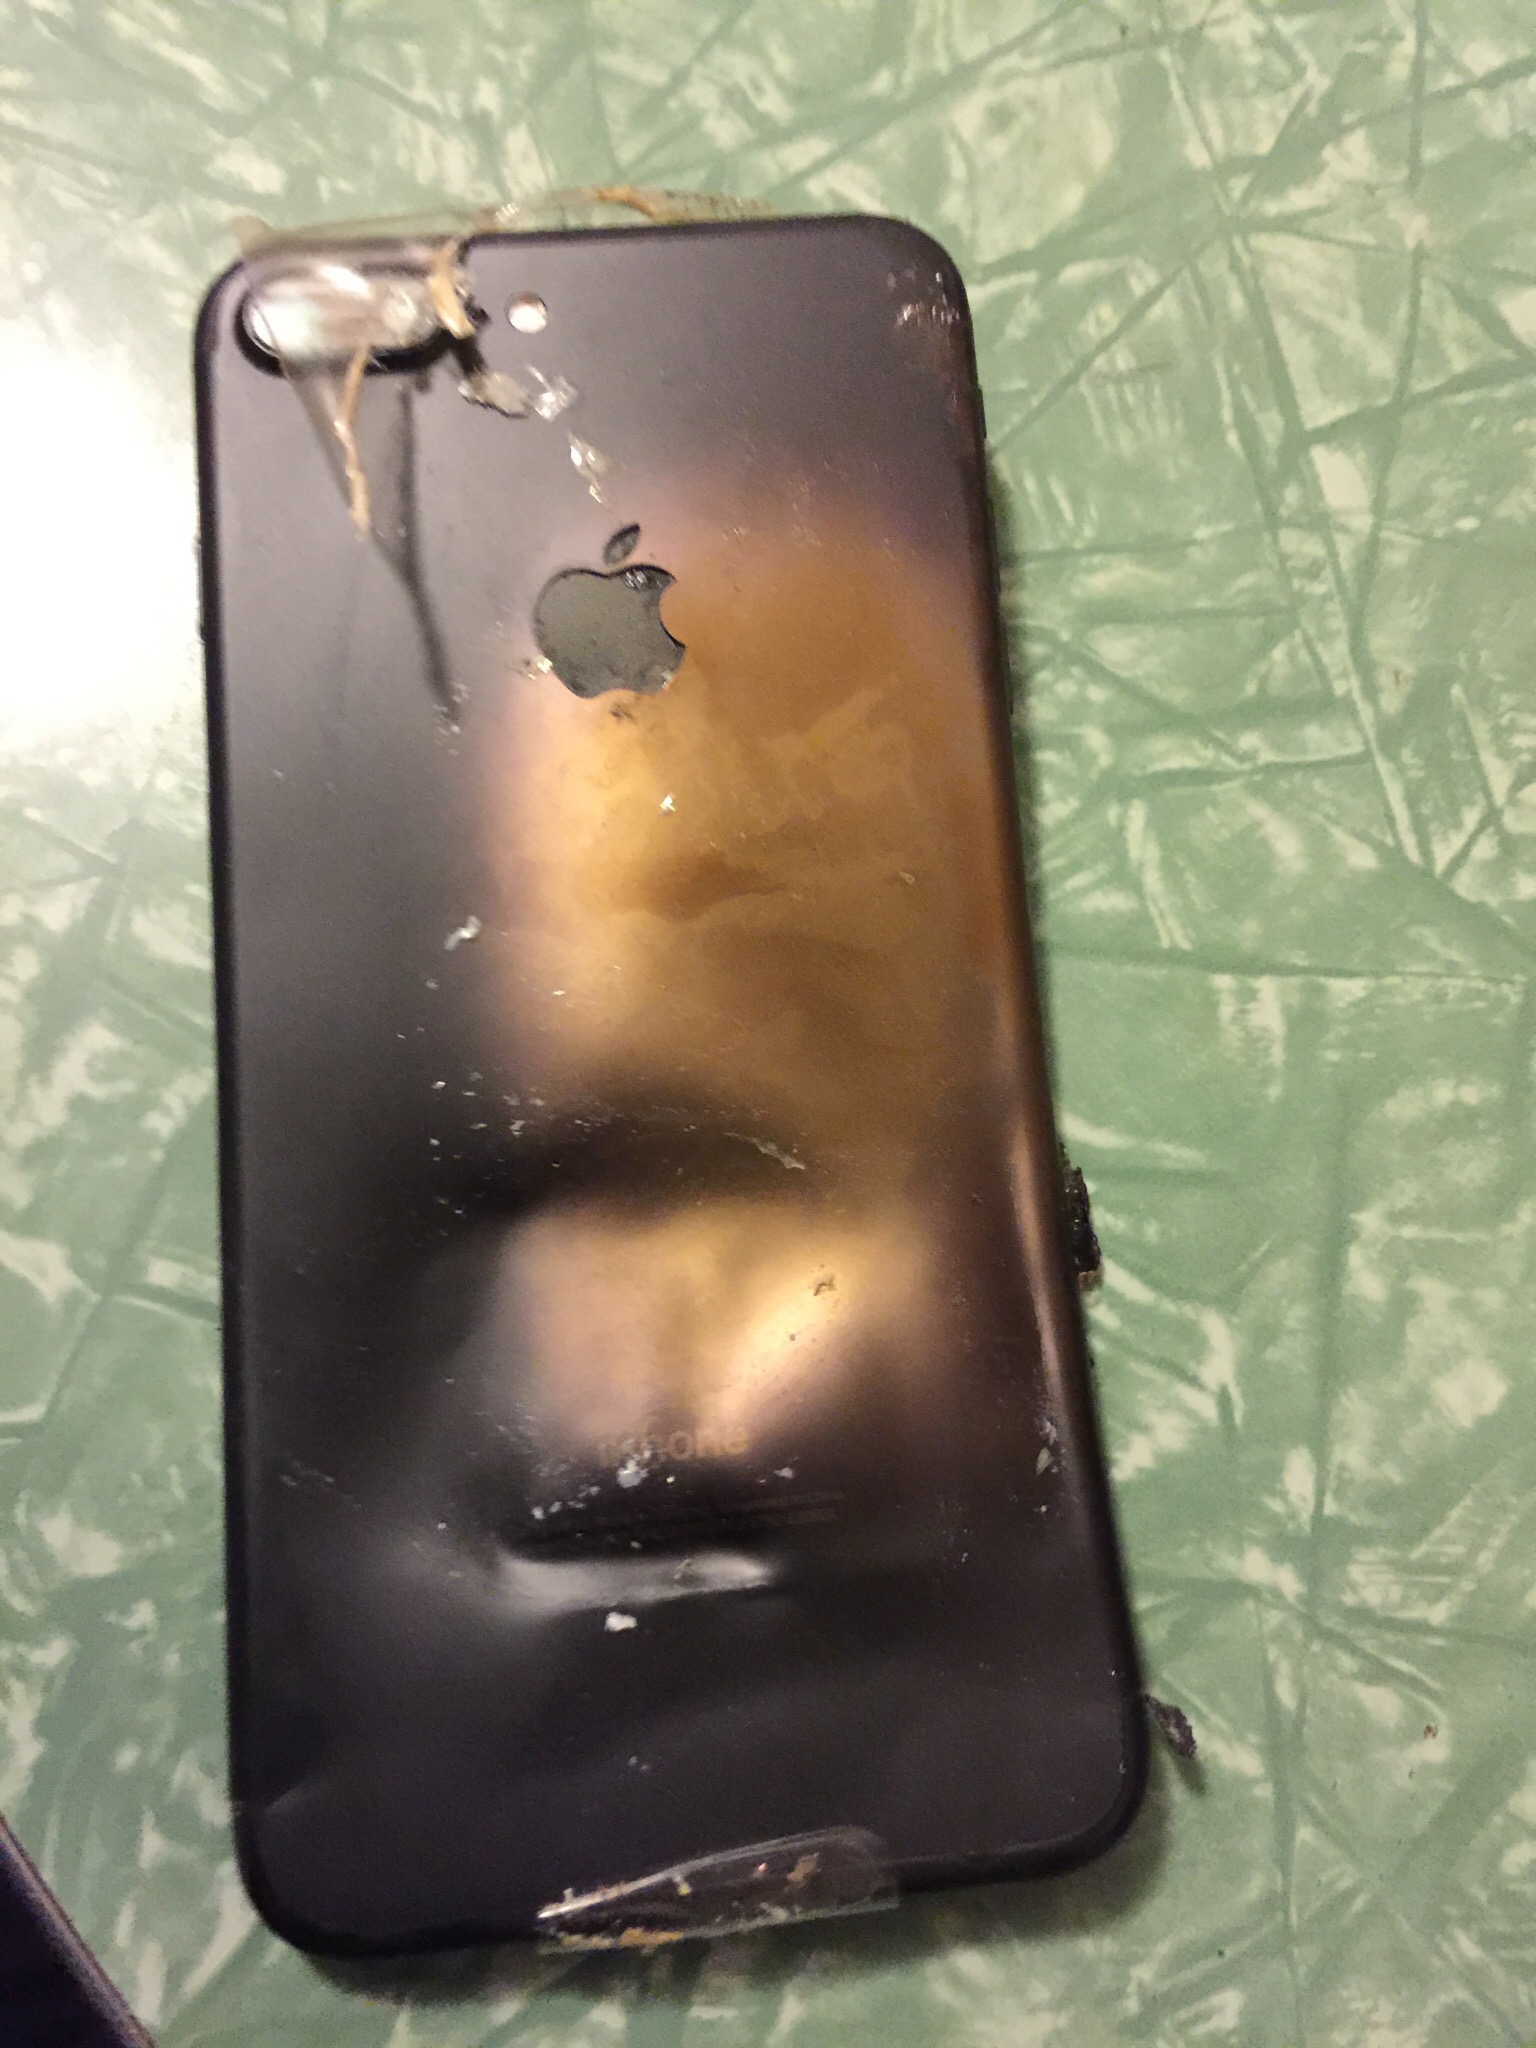 iphone 7 plus exploded images 4